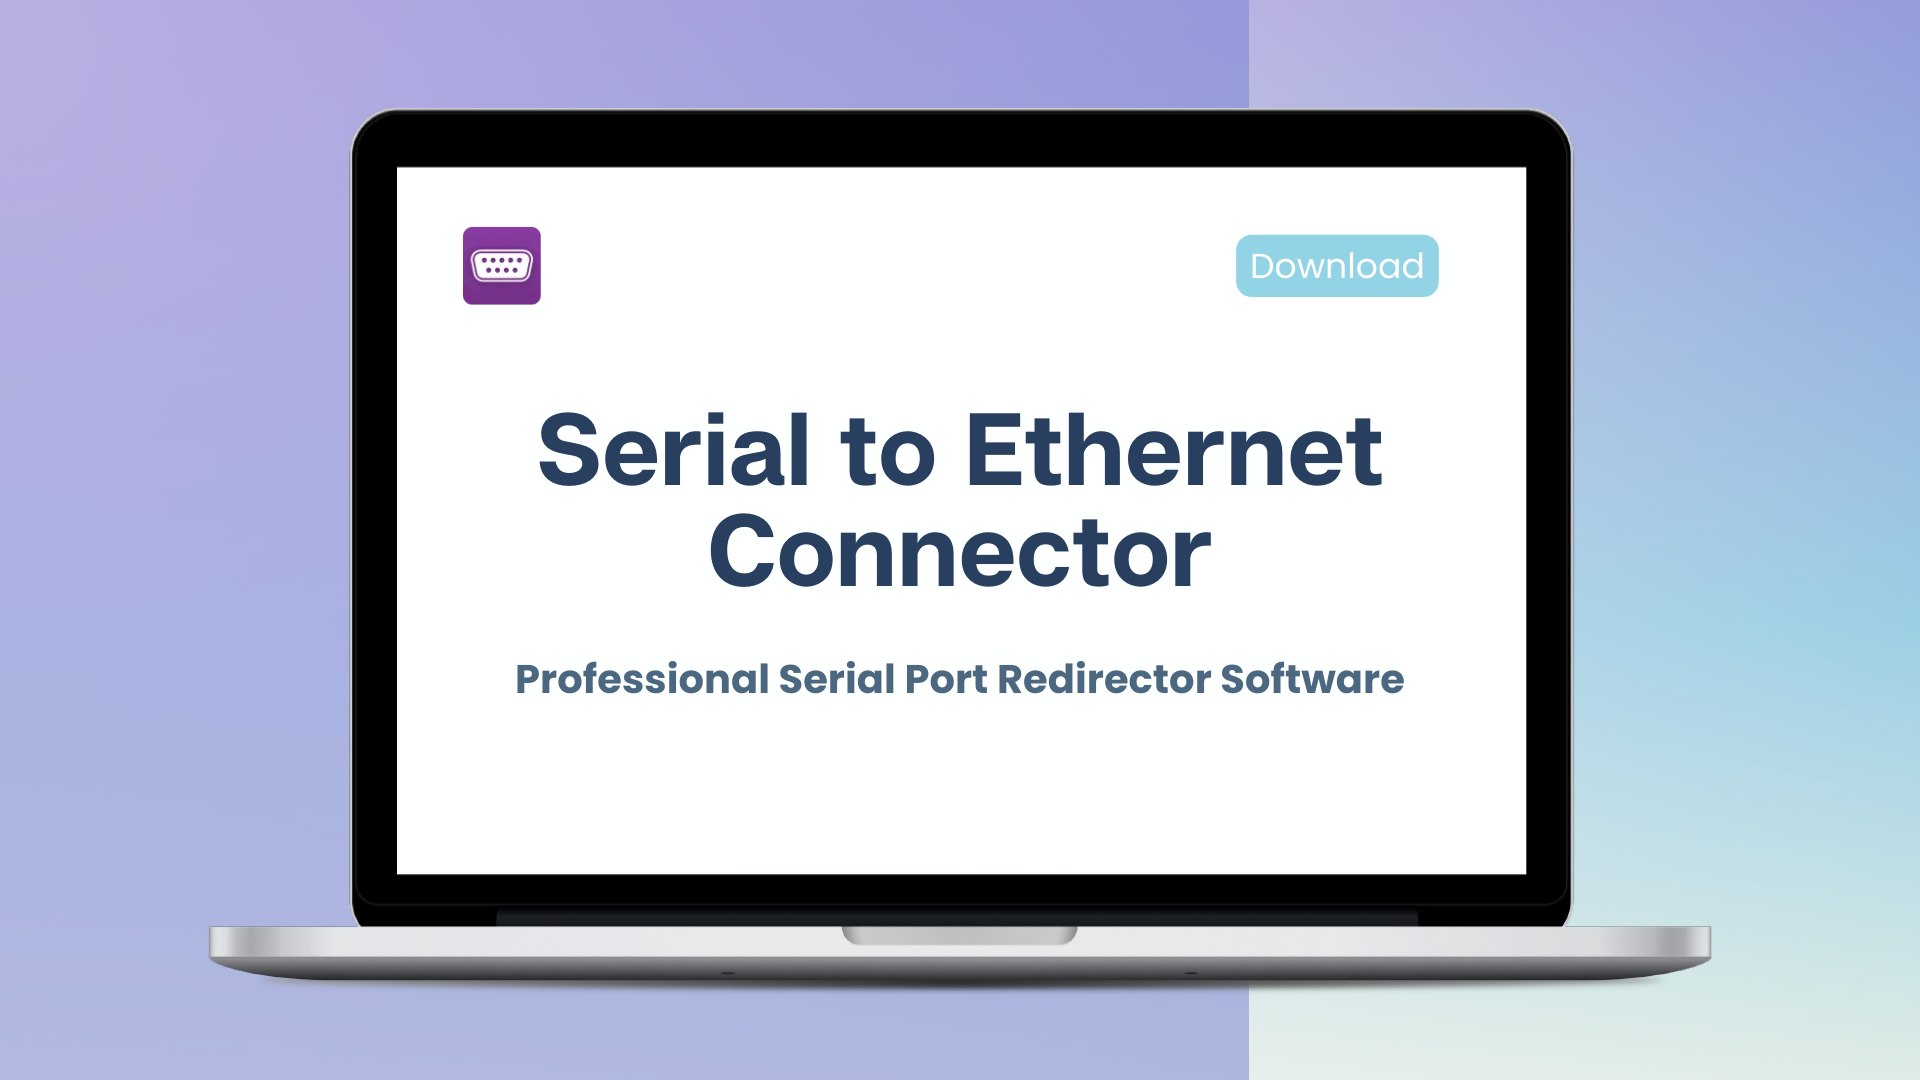 Serial to Ethernet Connector